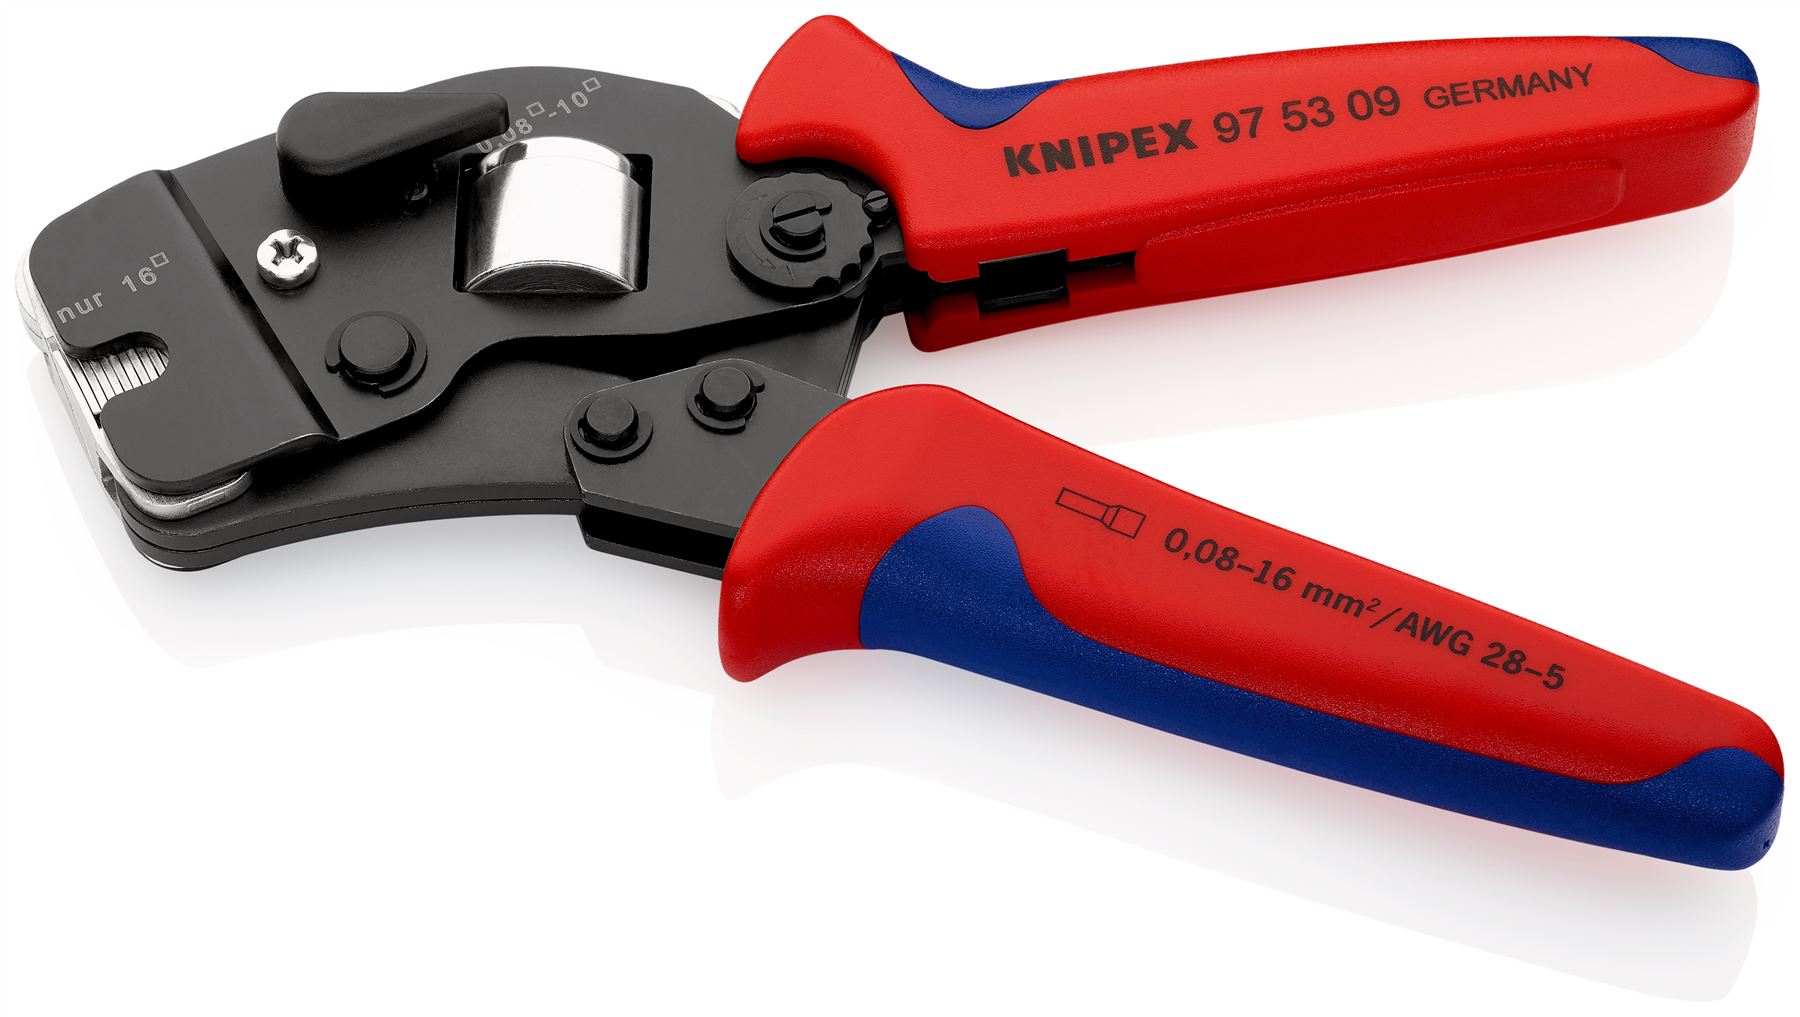 KNIPEX Self Adjusting Crimping Pliers for Wire Ferrules with Front Loading 0.08-10/16mm² 190mm Multi Component Grips 97 53 09 SB